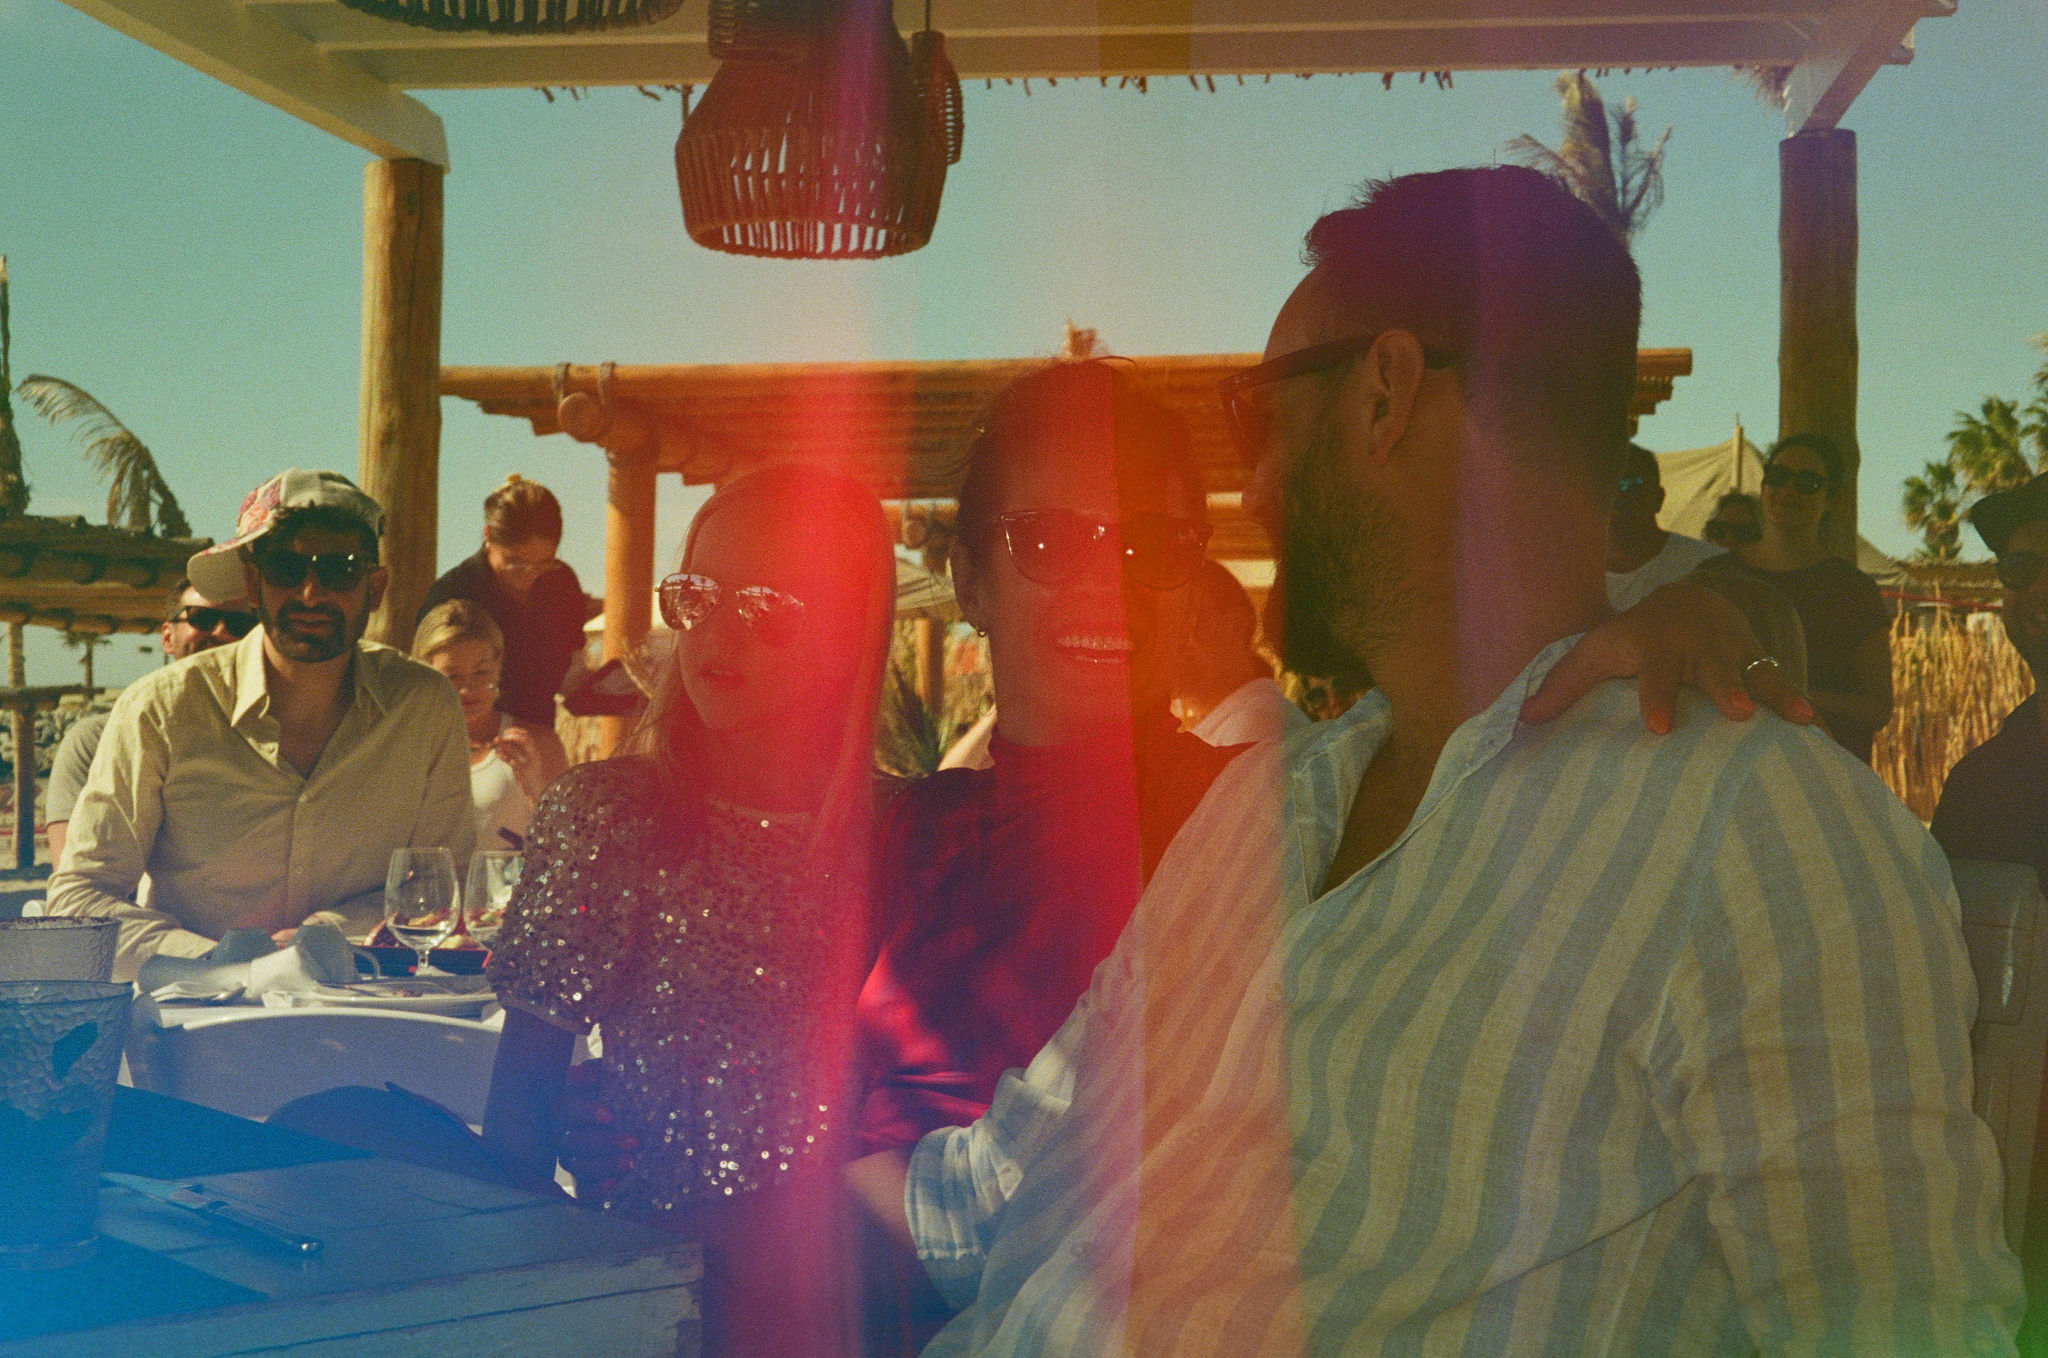 film style photo with sun flare and fuzzy filter. Outdoors man and woman sitting down at table looking at each other and smiling. Man wearing white and blue striped shirt. woman has arm around man. Coral nails. Pink and purple tight turtle nexk dress with slit. Little girl in background with sparkly shirt. Man sitting at another table in the background wearing a hat to the side. Al fresco daytime dining under auning with basket chandelier on the beach.